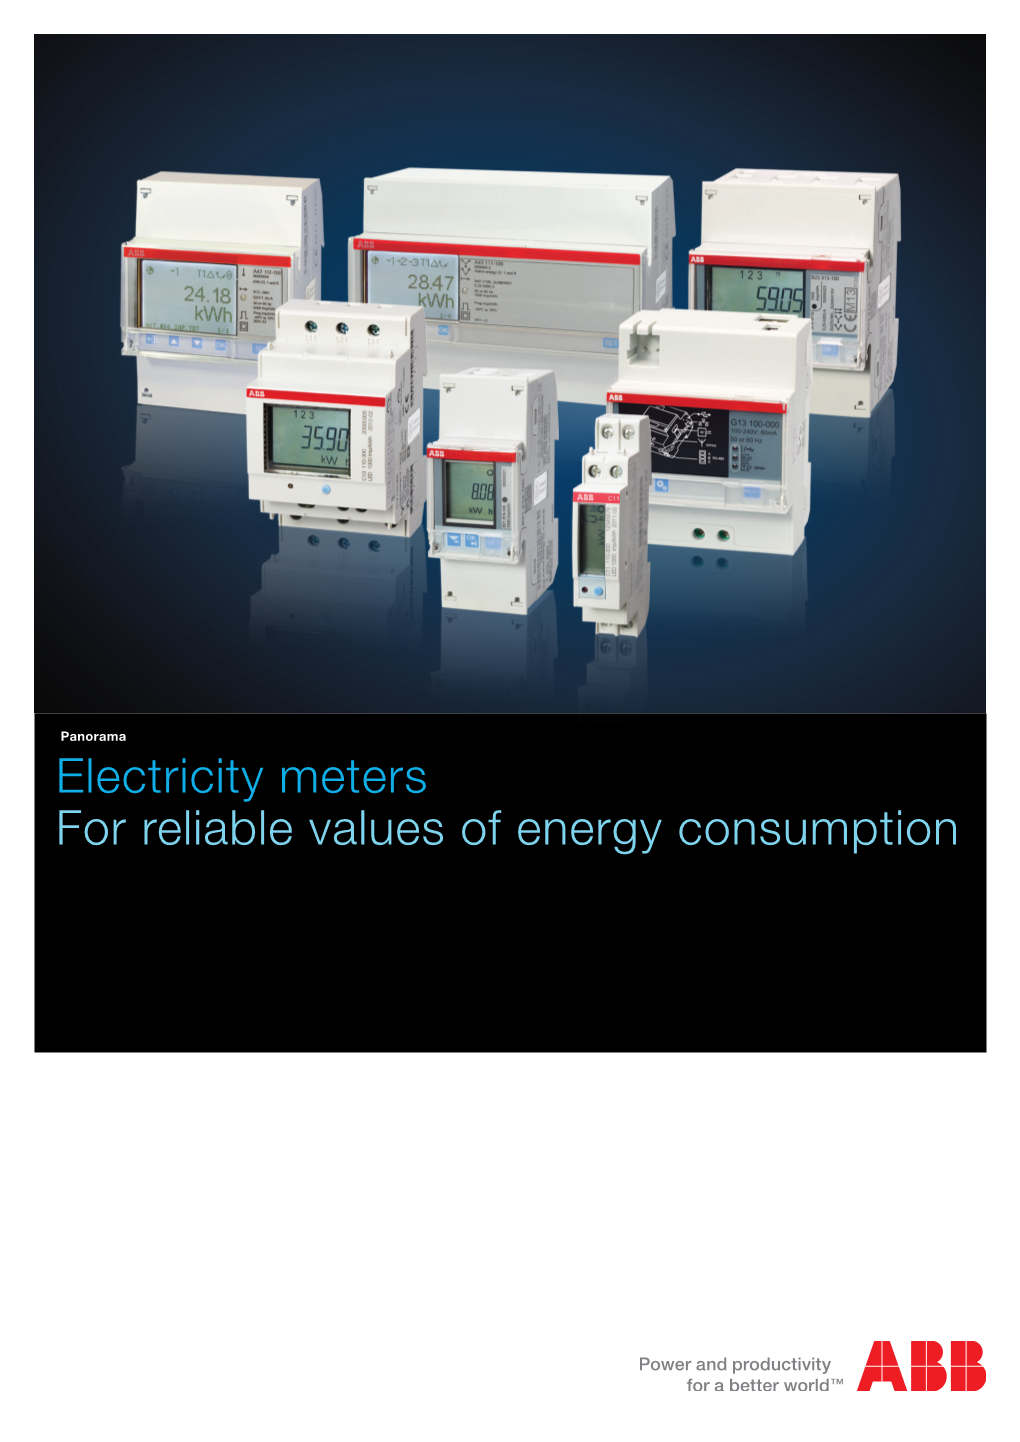 Electricity Meters for Reliable Values of Energy Consumption